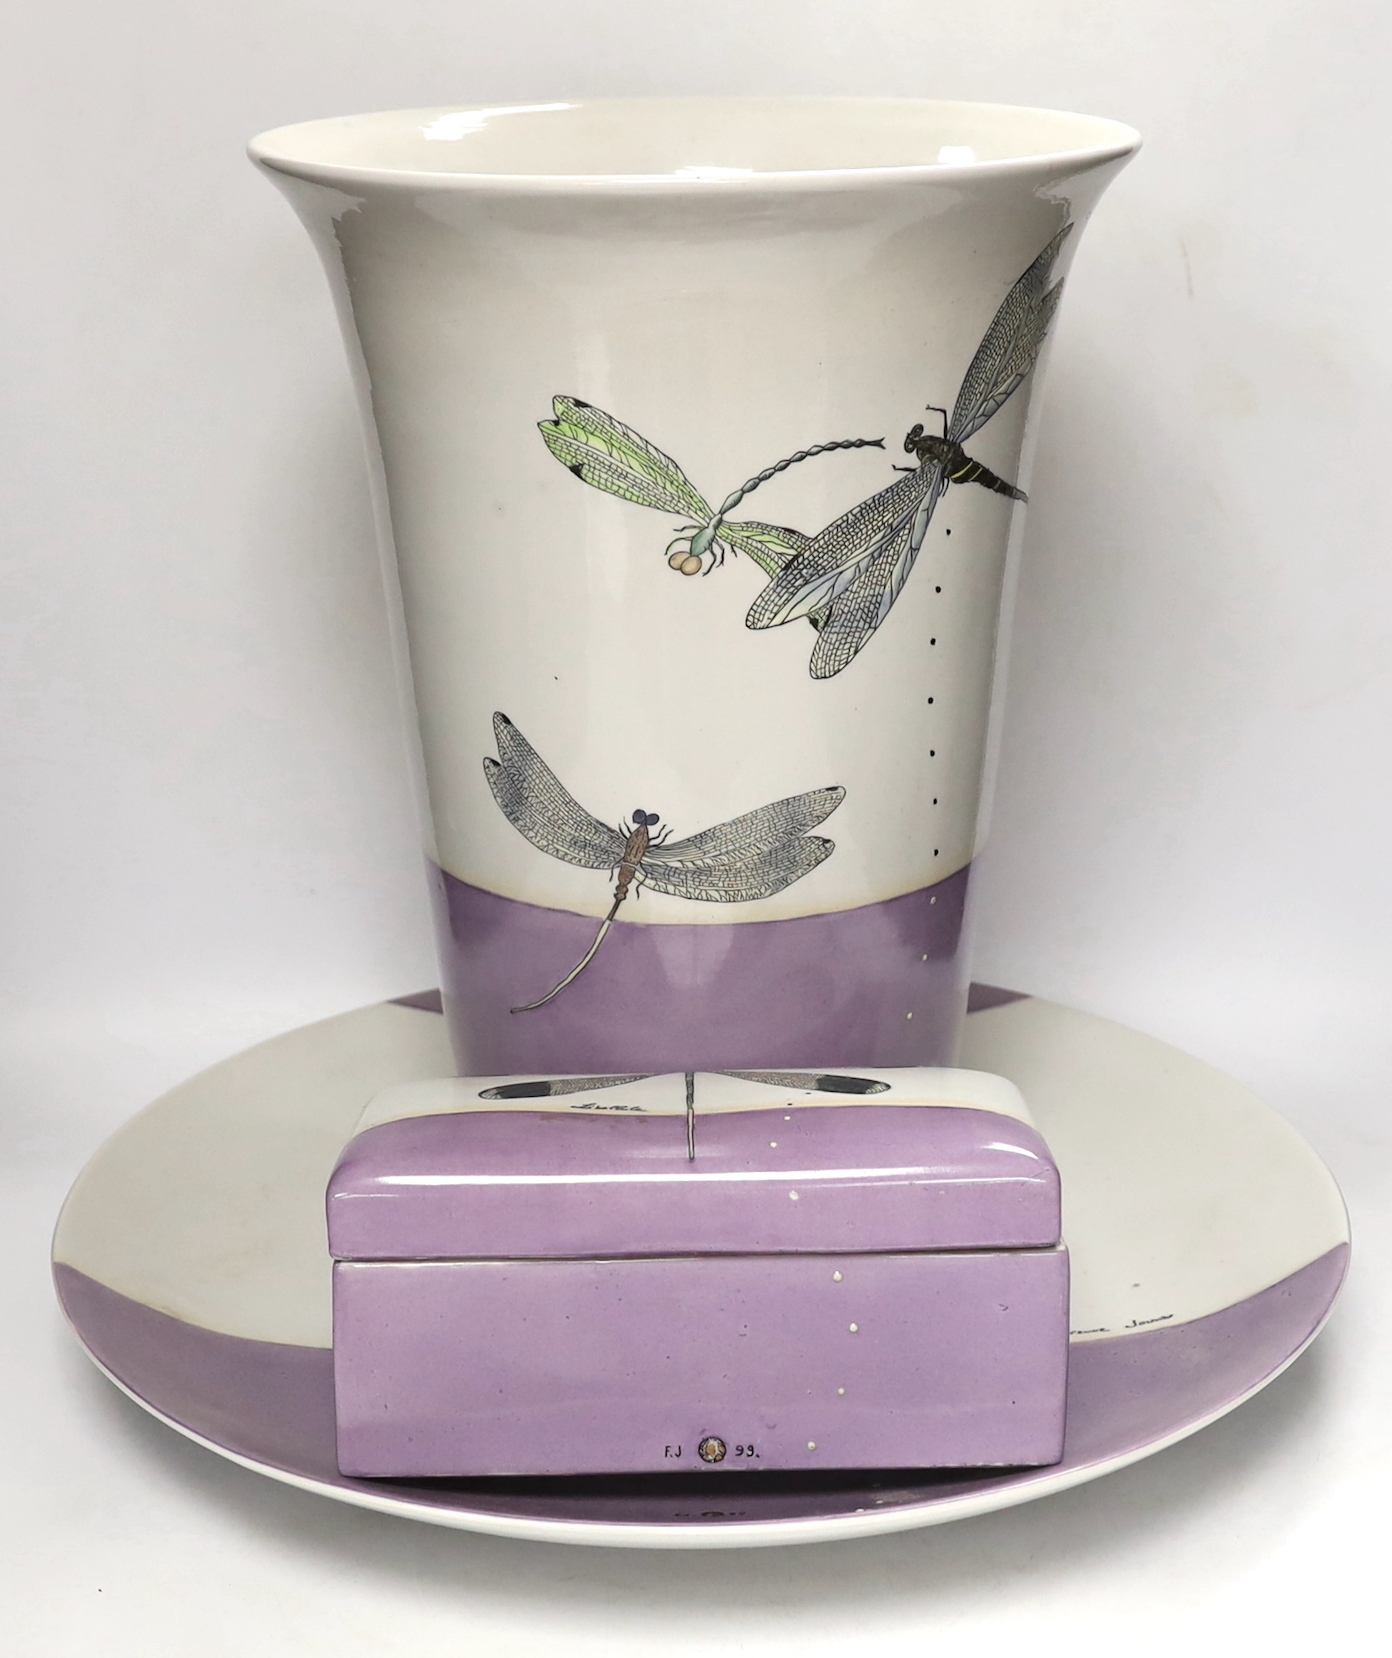 A signed Fabienne Jouvier Dragonfly pattern vase, dish and box, marked “Libellule”, 93, vase 41.5cm high